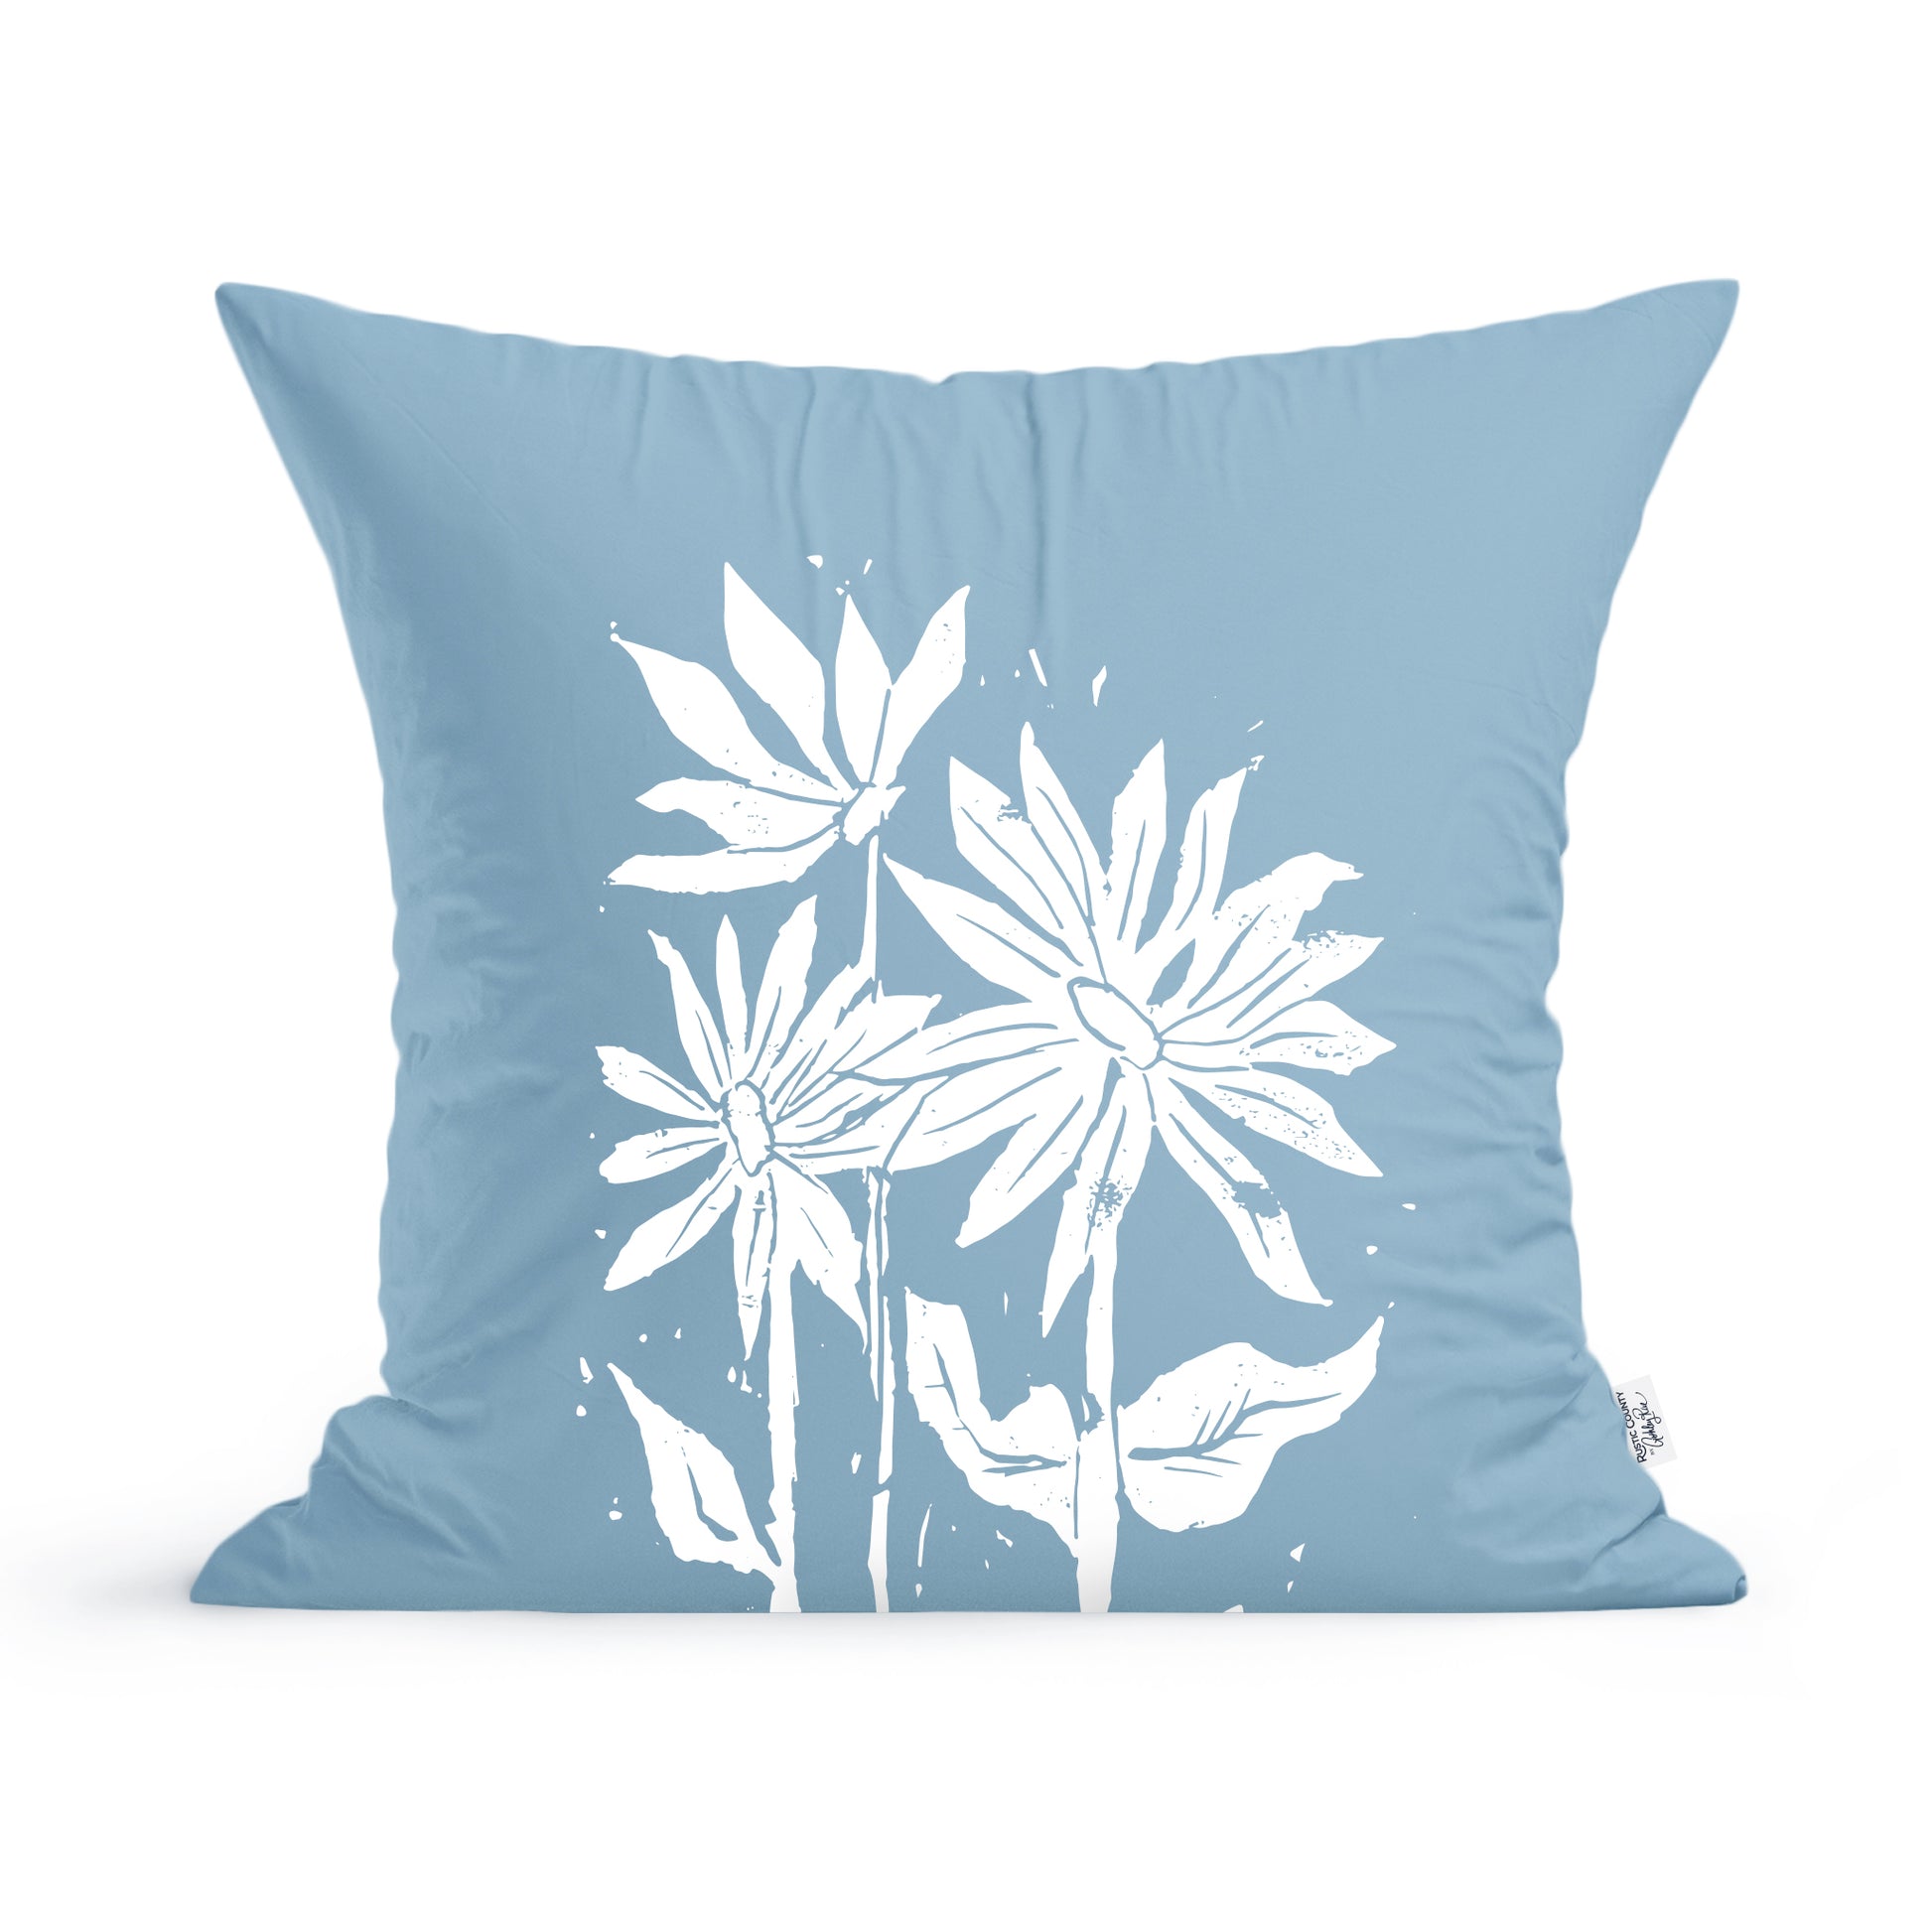 A light blue square Sunflowers Pillow featuring a white artistic print of three stylized sunflowers with leaves by Rustic County.